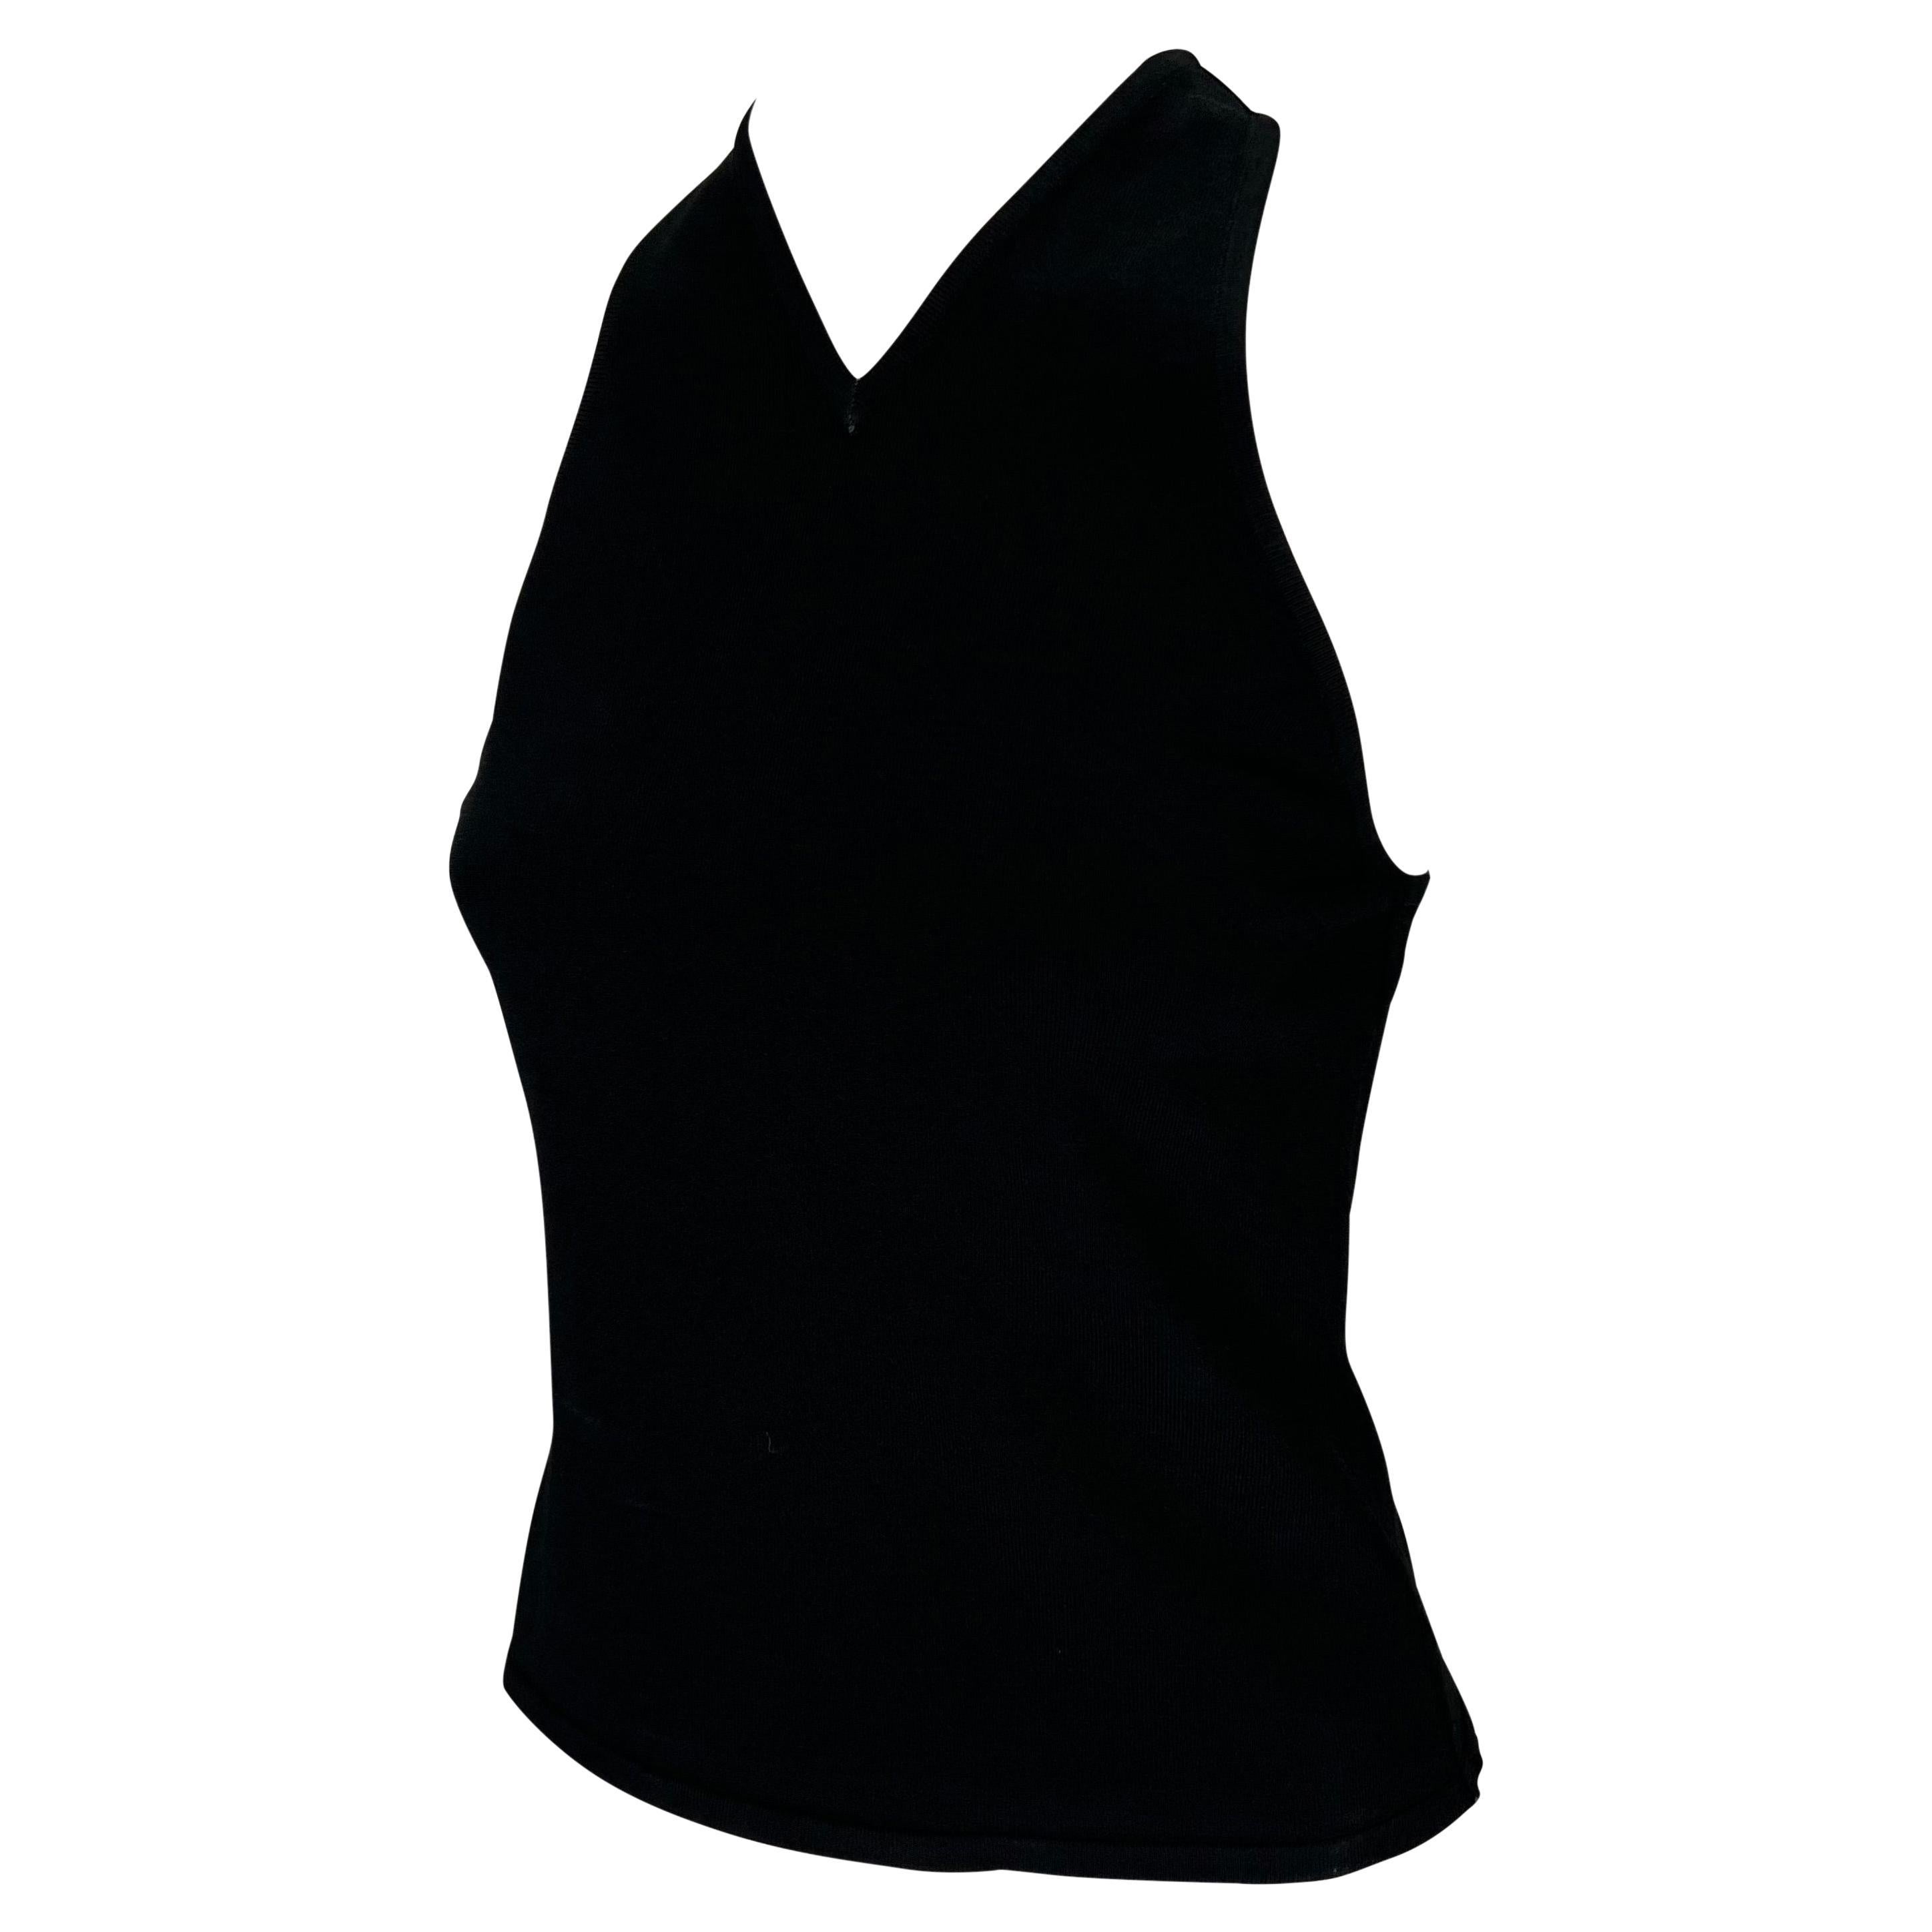 S/S 1998 Gucci by Tom Ford Black Stretch Knit Racerback Tank  For Sale 1